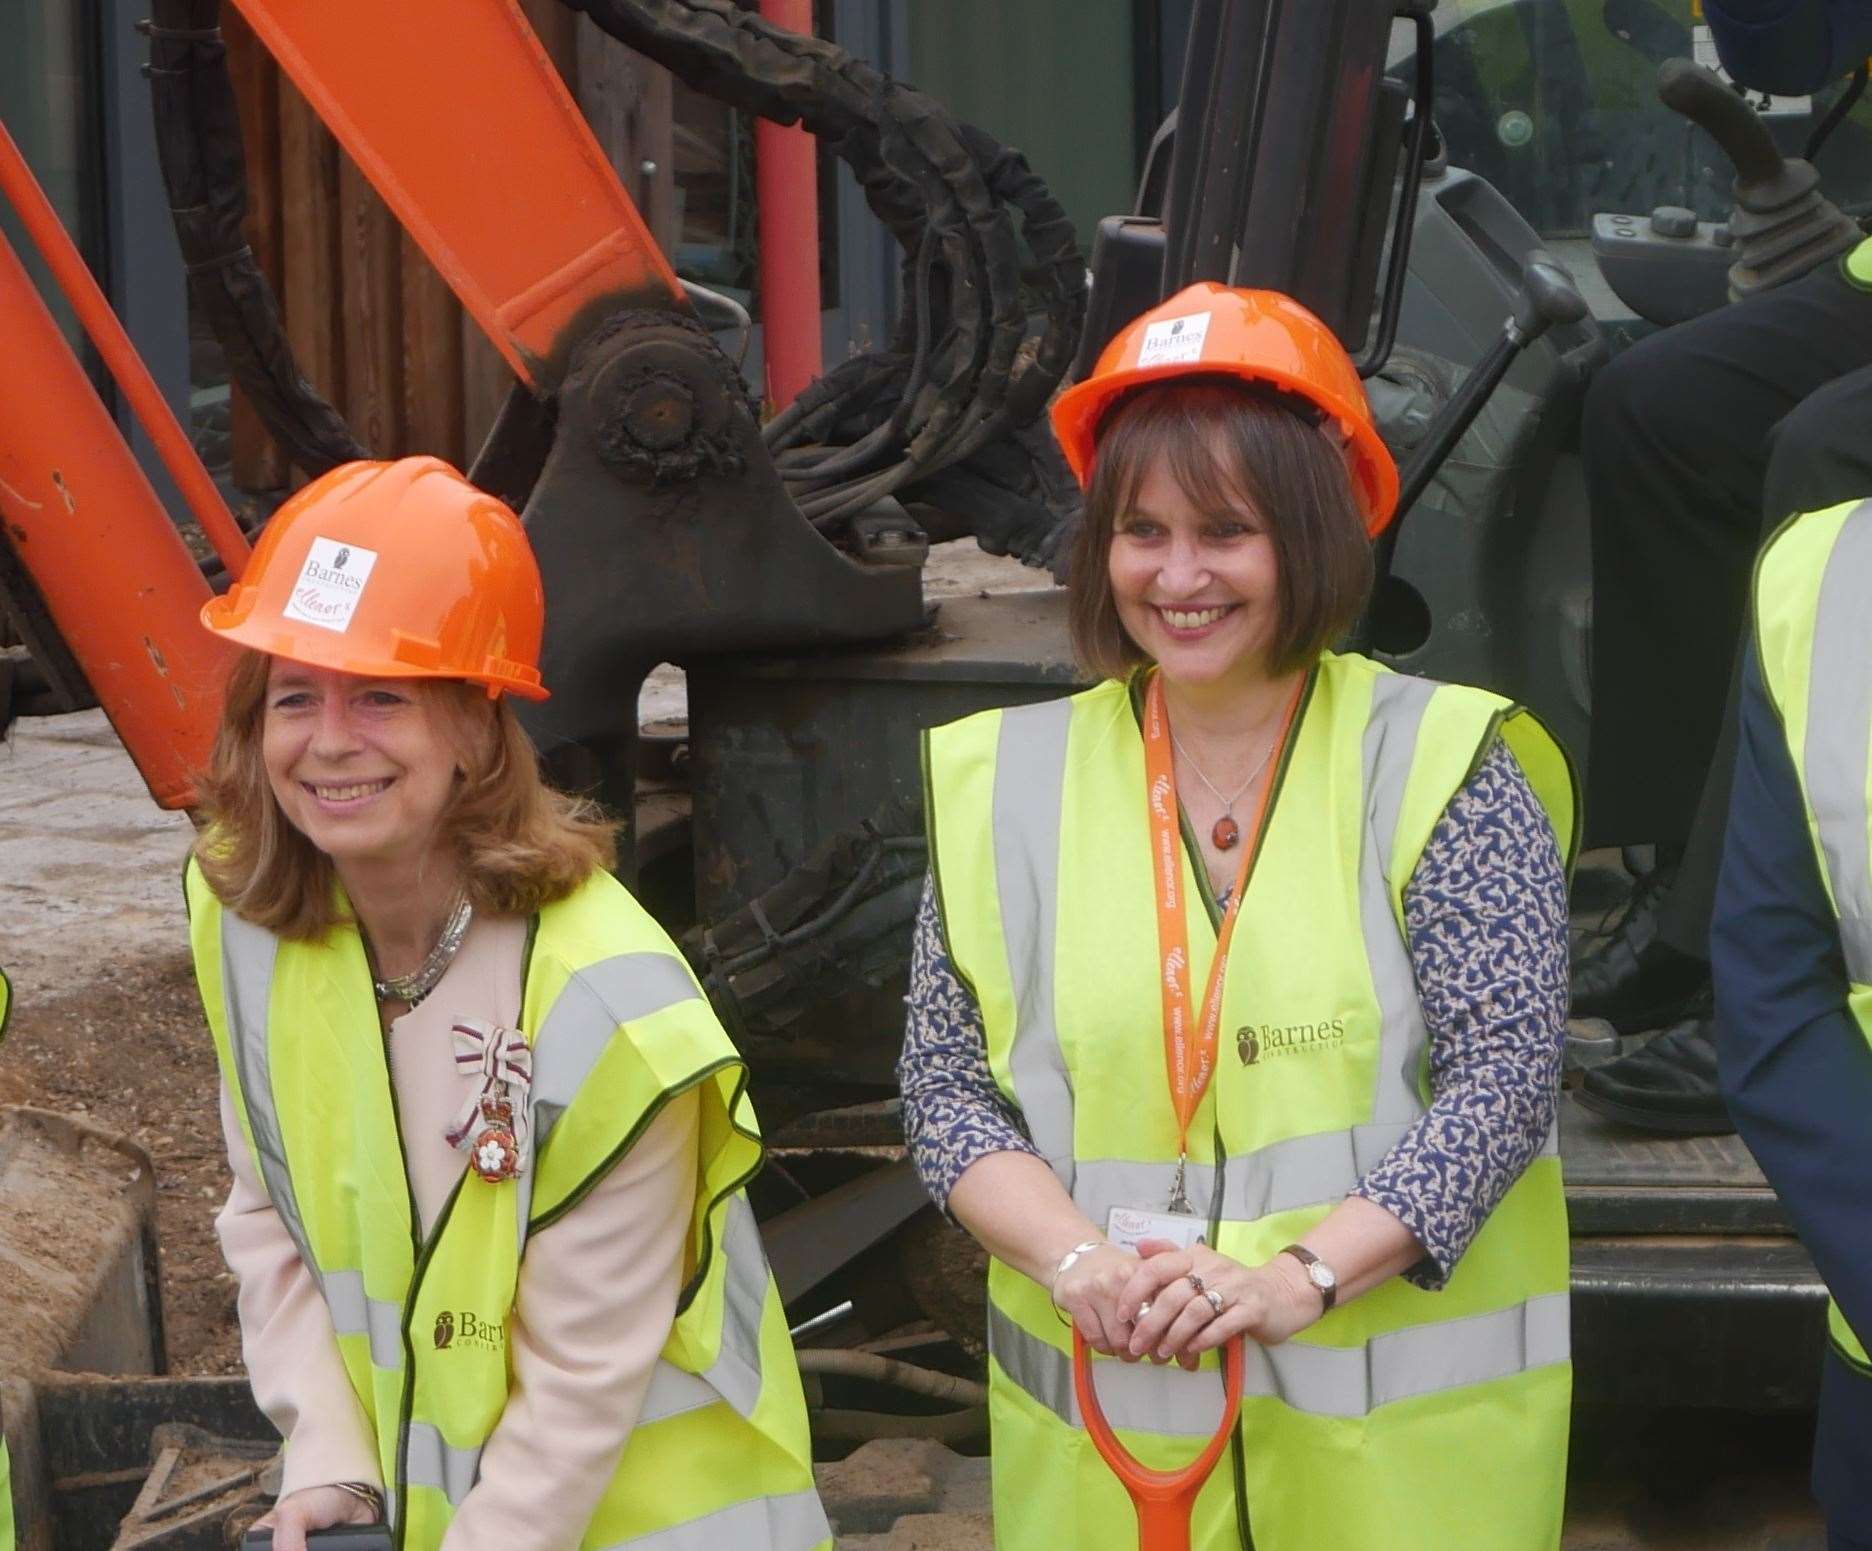 Lady Colgrain breaking the ground at the construction site at Ellenors with Jacqui Hackett standing beside